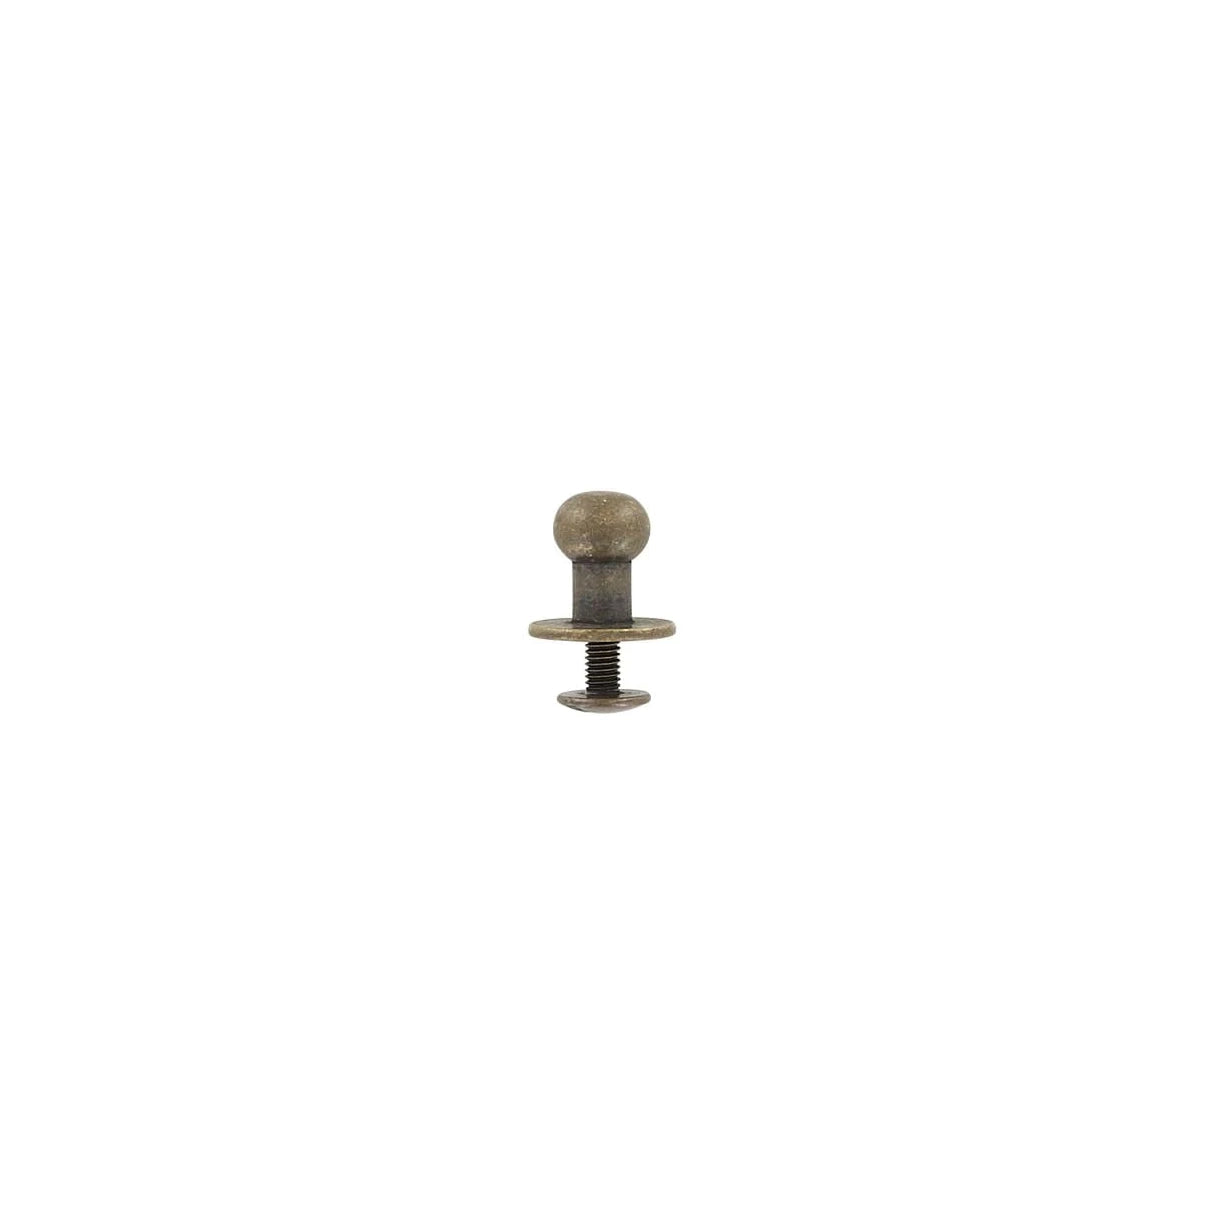 12mm, Antique Brass, Flat Top Collar Button Stud with Screw, Solid Brass, #P-2391-ANTB